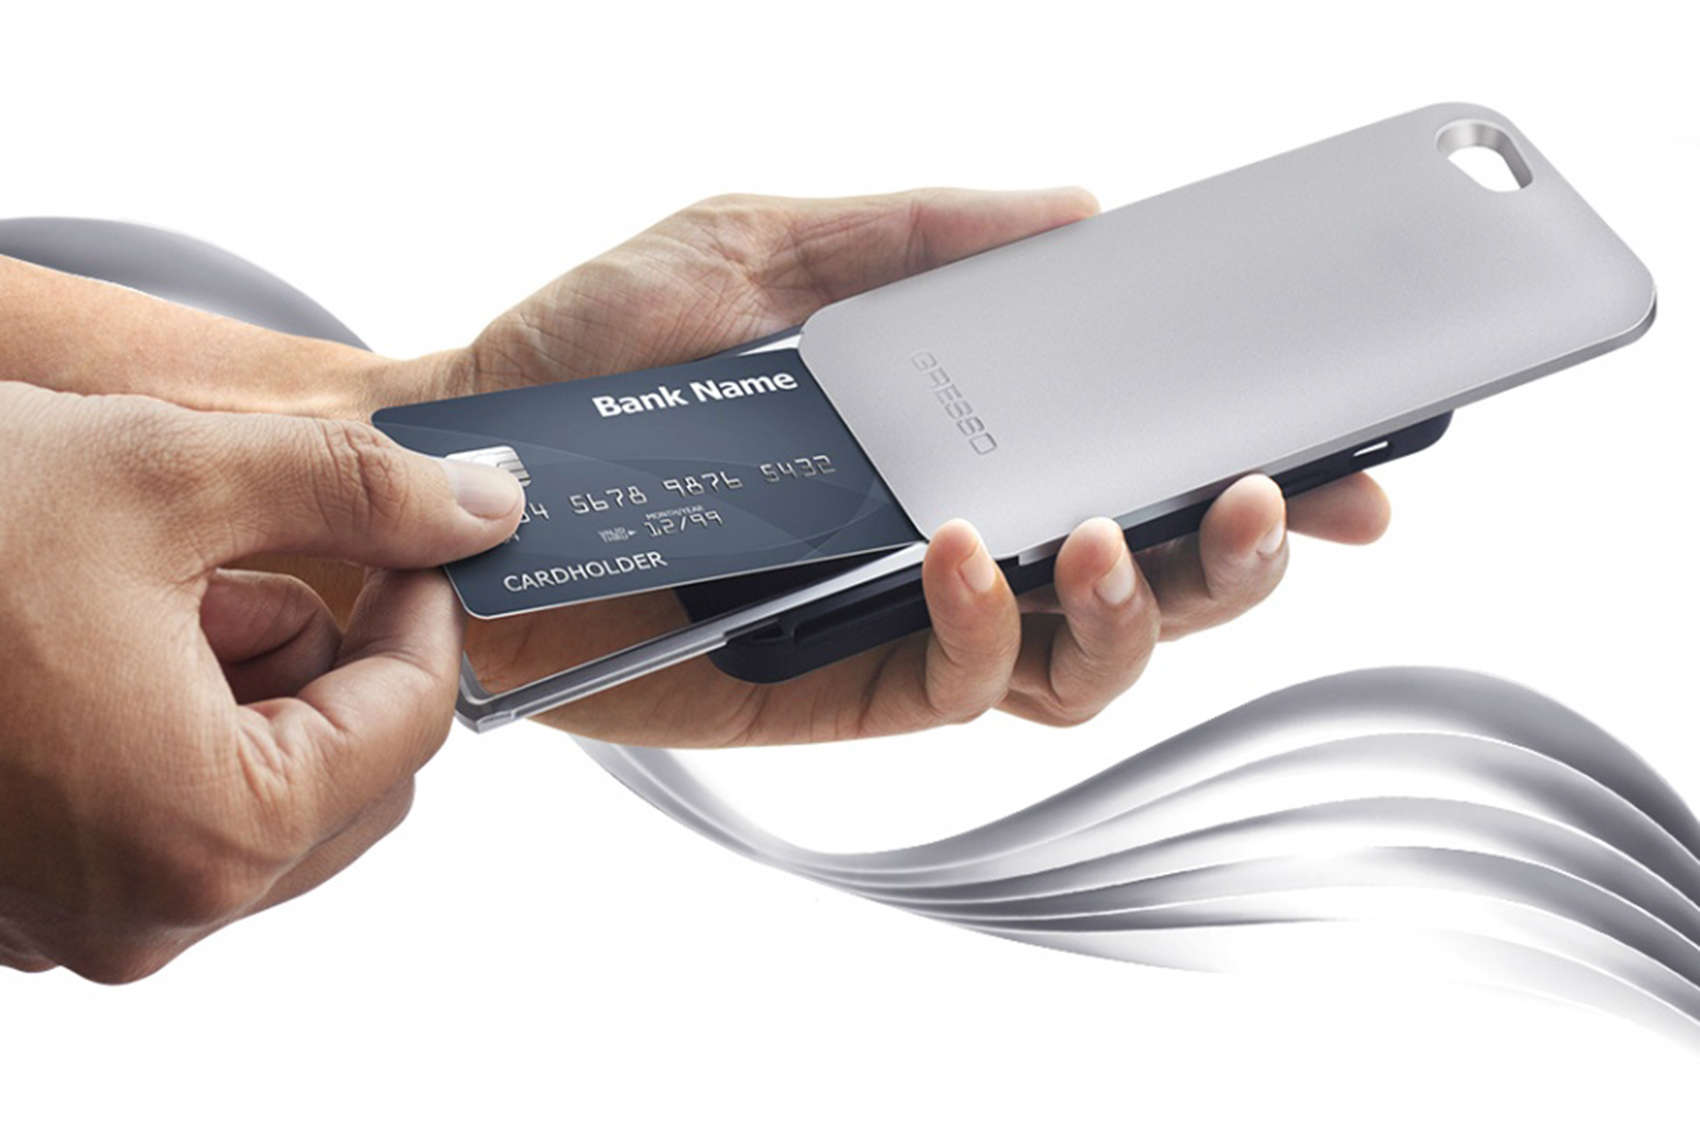 The ALUMINUM Slider case for the iPhone 6 by Gresso has a secret drawer for a credit card.